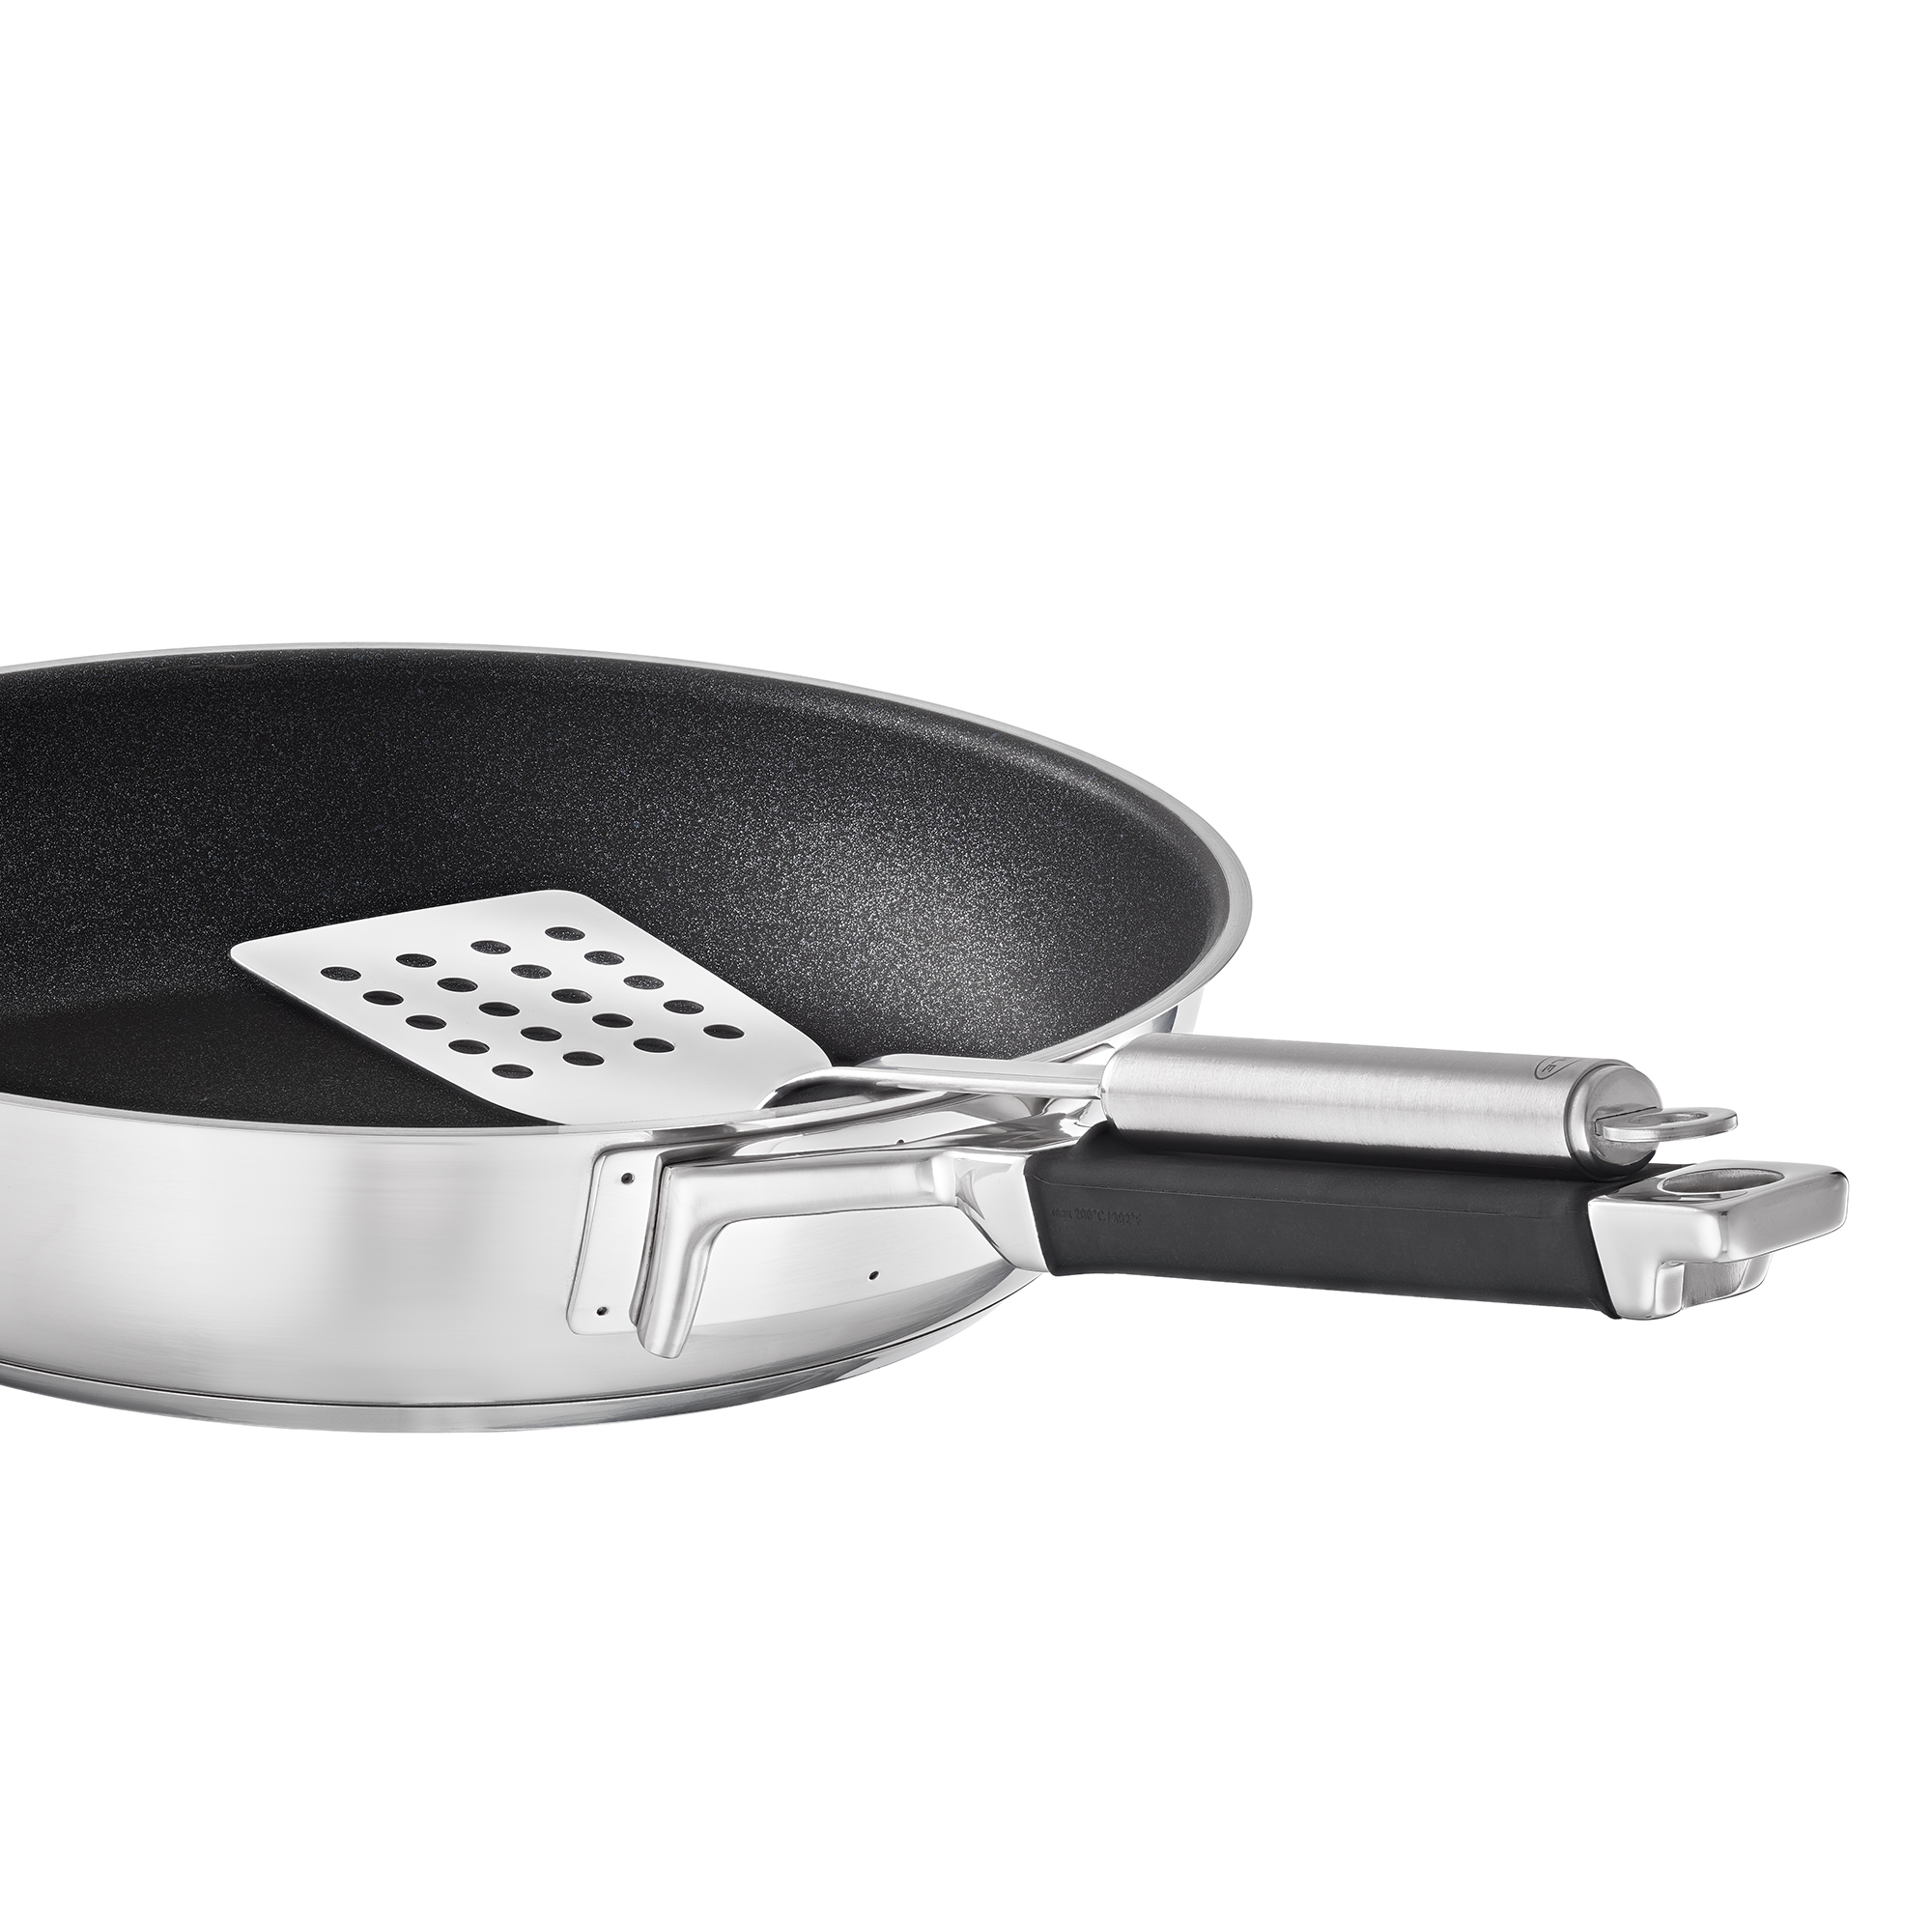 Frying Pan "Silence PRO" Ø 32 cm with non-stick coating ProResist